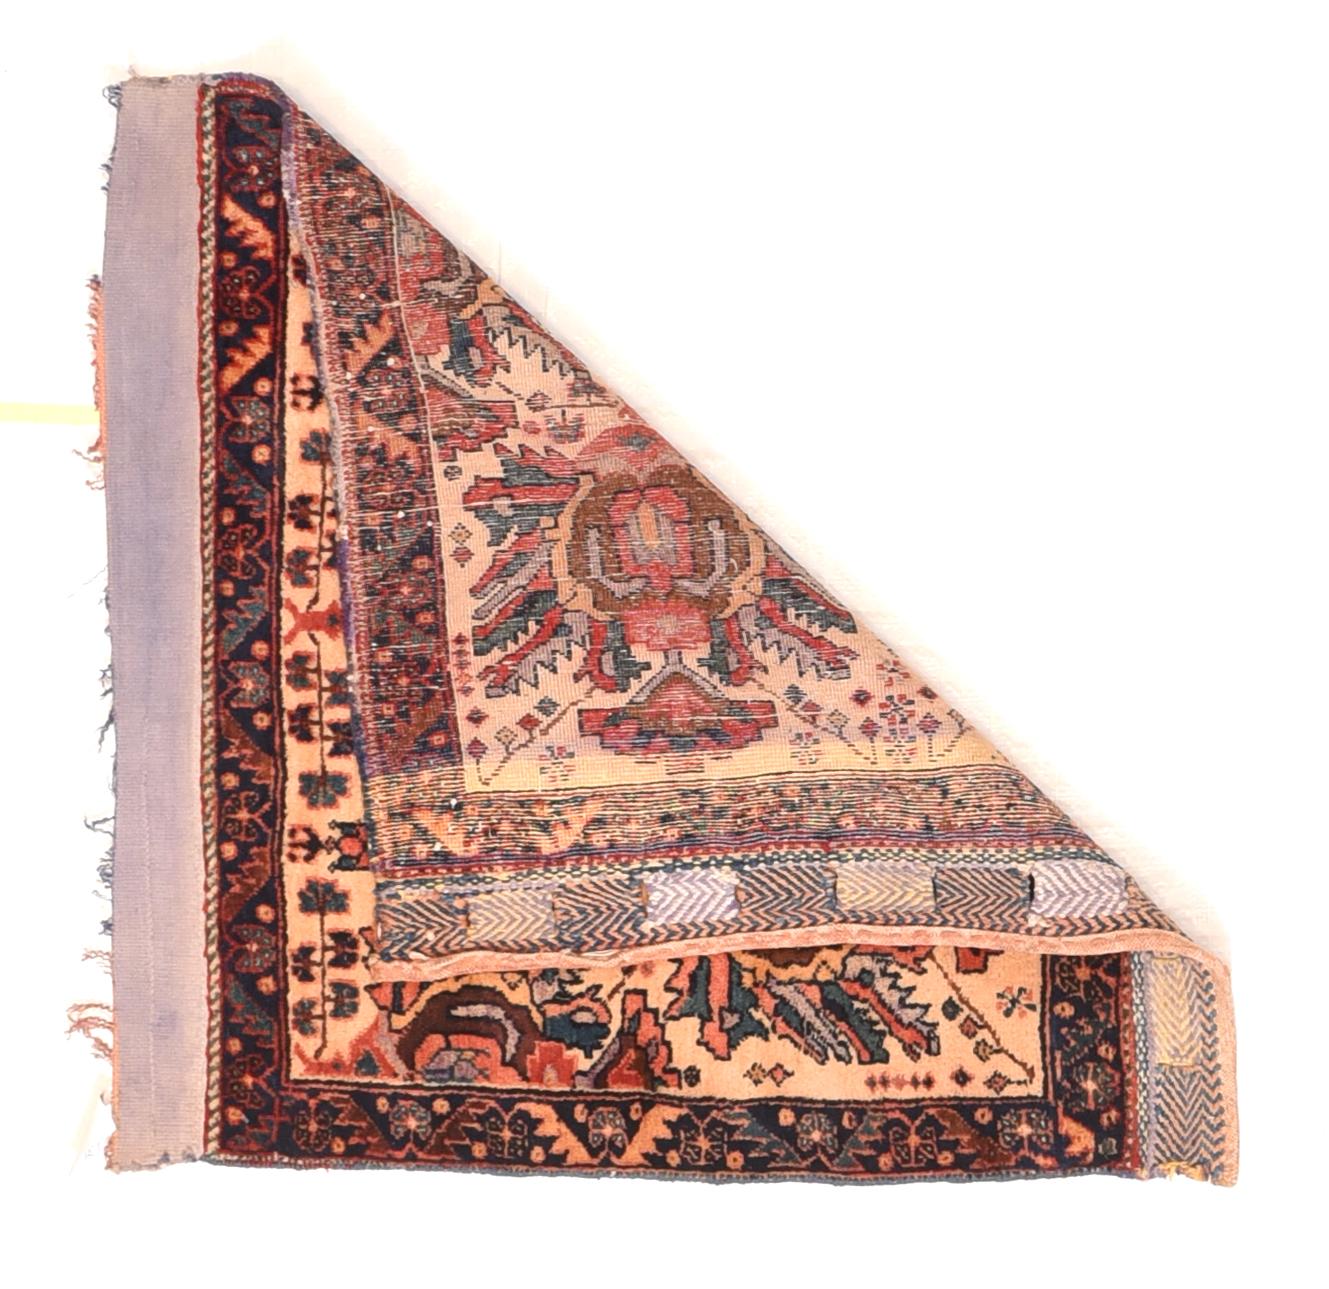 Antique Afshar Rug 2'2'' x 2'2''. Saddlebags are always made in pairs and this attractive, boldly patterned piece shows two rows of giant ragged petal palmettes within a navy serrated leaf and reversing fan palmette border. with intact